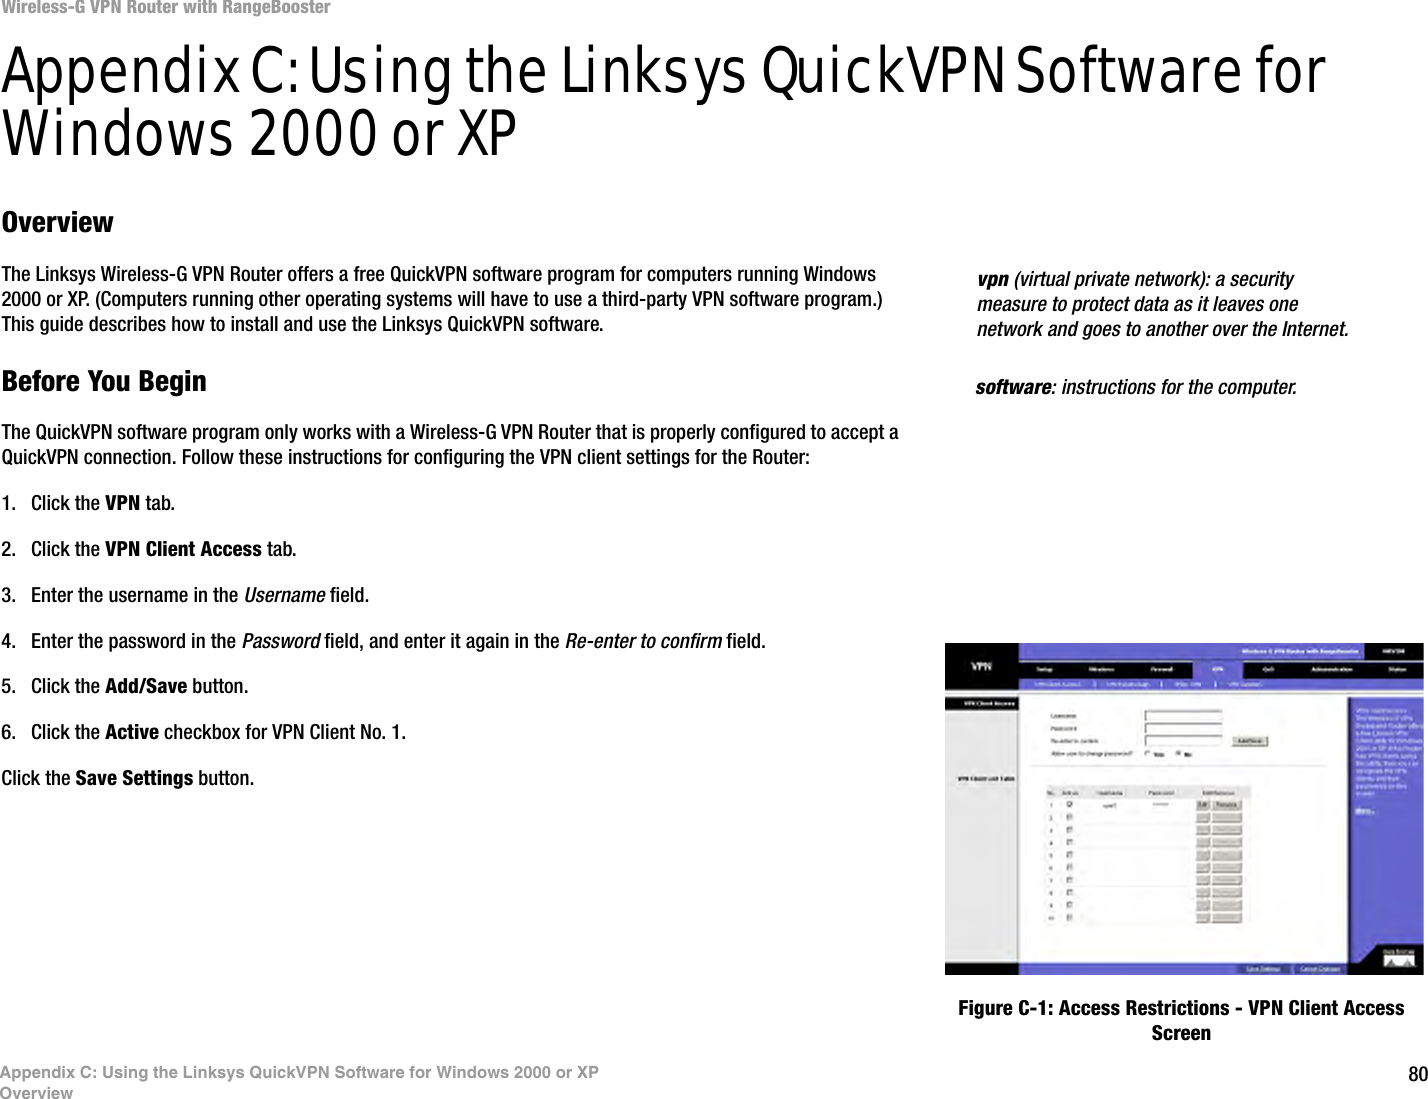 80Wireless-G VPN Router with RangeBoosterAppendix C: Using the Linksys QuickVPN Software for Windows 2000 or XPOverviewAppendix C: Using the Linksys QuickVPN Software for Windows 2000 or XPOverviewThe Linksys Wireless-G VPN Router offers a free QuickVPN software program for computers running Windows 2000 or XP. (Computers running other operating systems will have to use a third-party VPN software program.) This guide describes how to install and use the Linksys QuickVPN software.Before You BeginThe QuickVPN software program only works with a Wireless-G VPN Router that is properly configured to accept a QuickVPN connection. Follow these instructions for configuring the VPN client settings for the Router:1. Click the VPN tab.2. Click the VPN Client Access tab.3. Enter the username in the Username field.4. Enter the password in the Password field, and enter it again in the Re-enter to confirm field.5. Click the Add/Save button.6. Click the Active checkbox for VPN Client No. 1.Click the Save Settings button.vpn (virtual private network): a security measure to protect data as it leaves one network and goes to another over the Internet.software: instructions for the computer.Figure C-1: Access Restrictions - VPN Client Access Screen